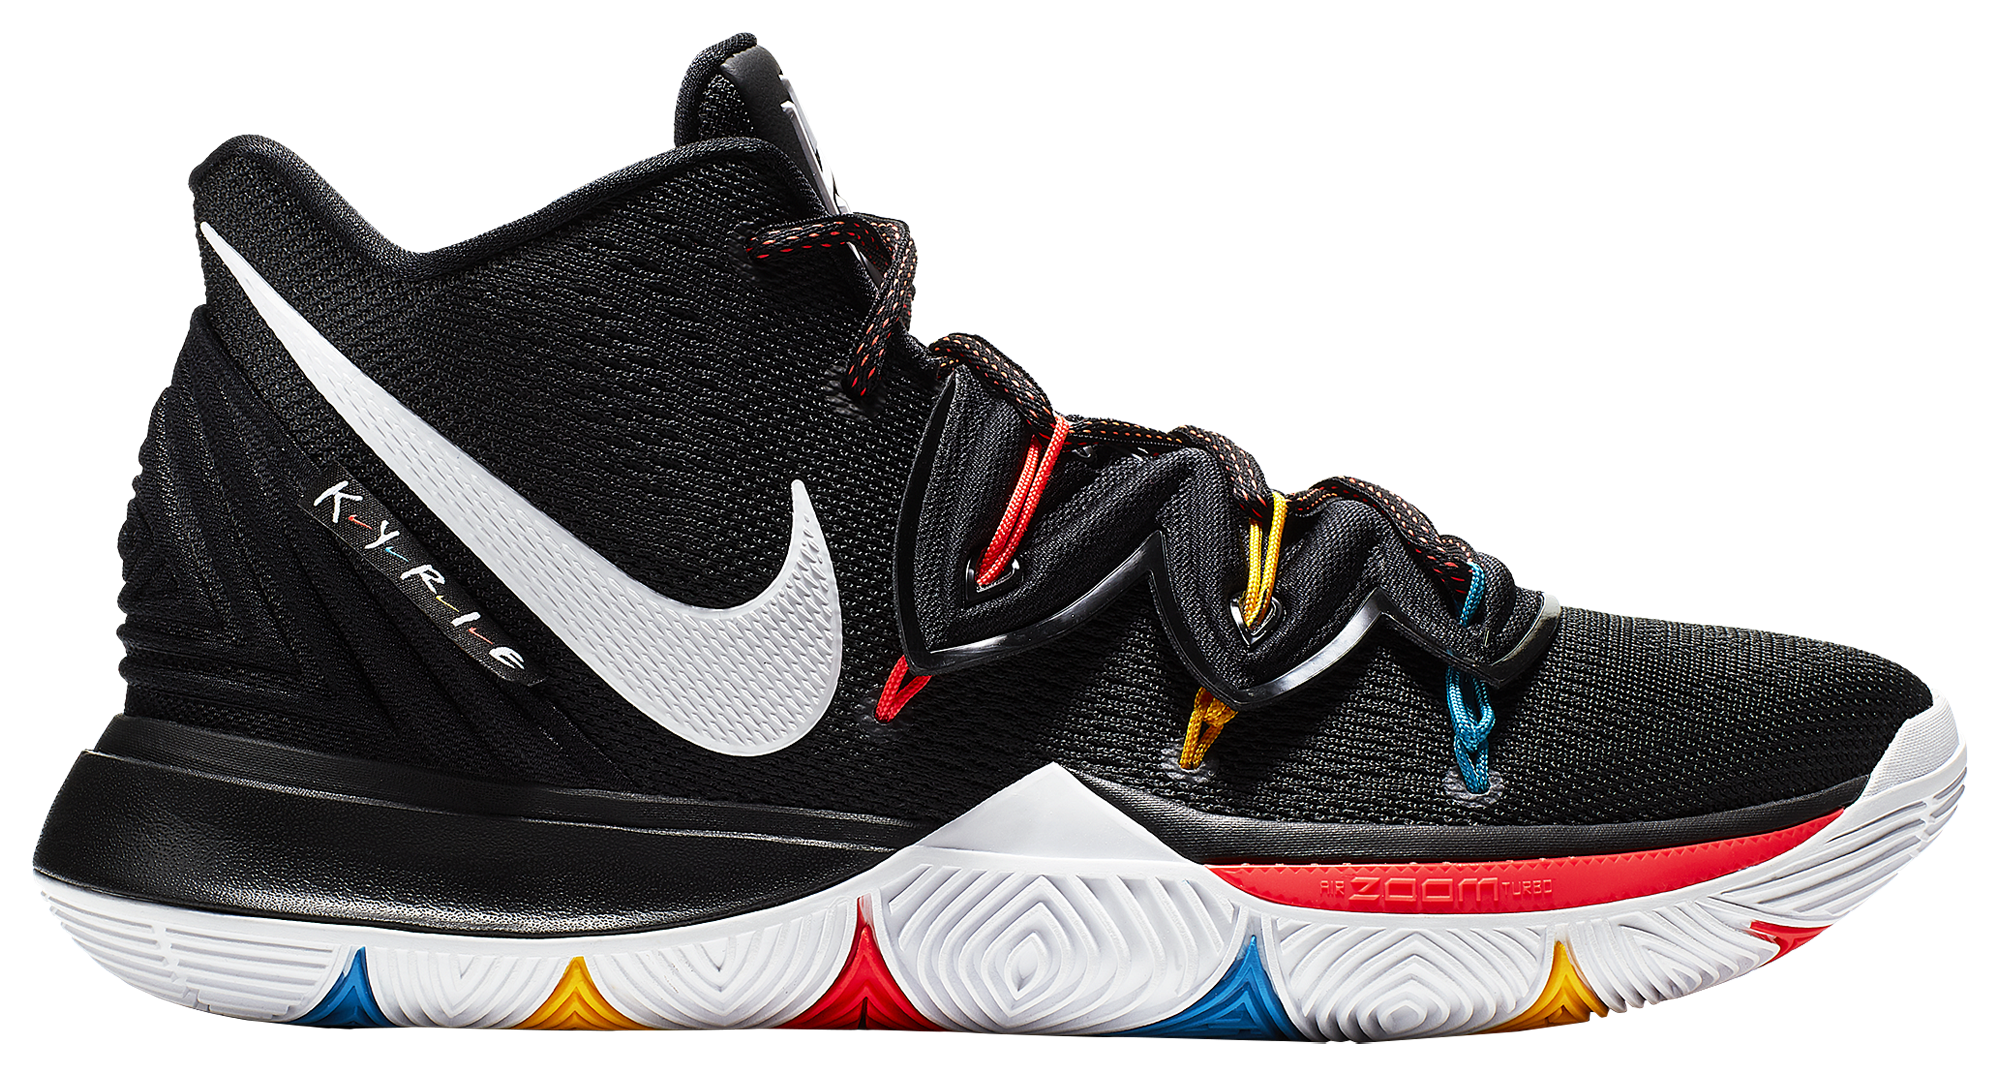 A Closer Look at the Nike Kyrie 5 EYBL Shoes Free Shipping